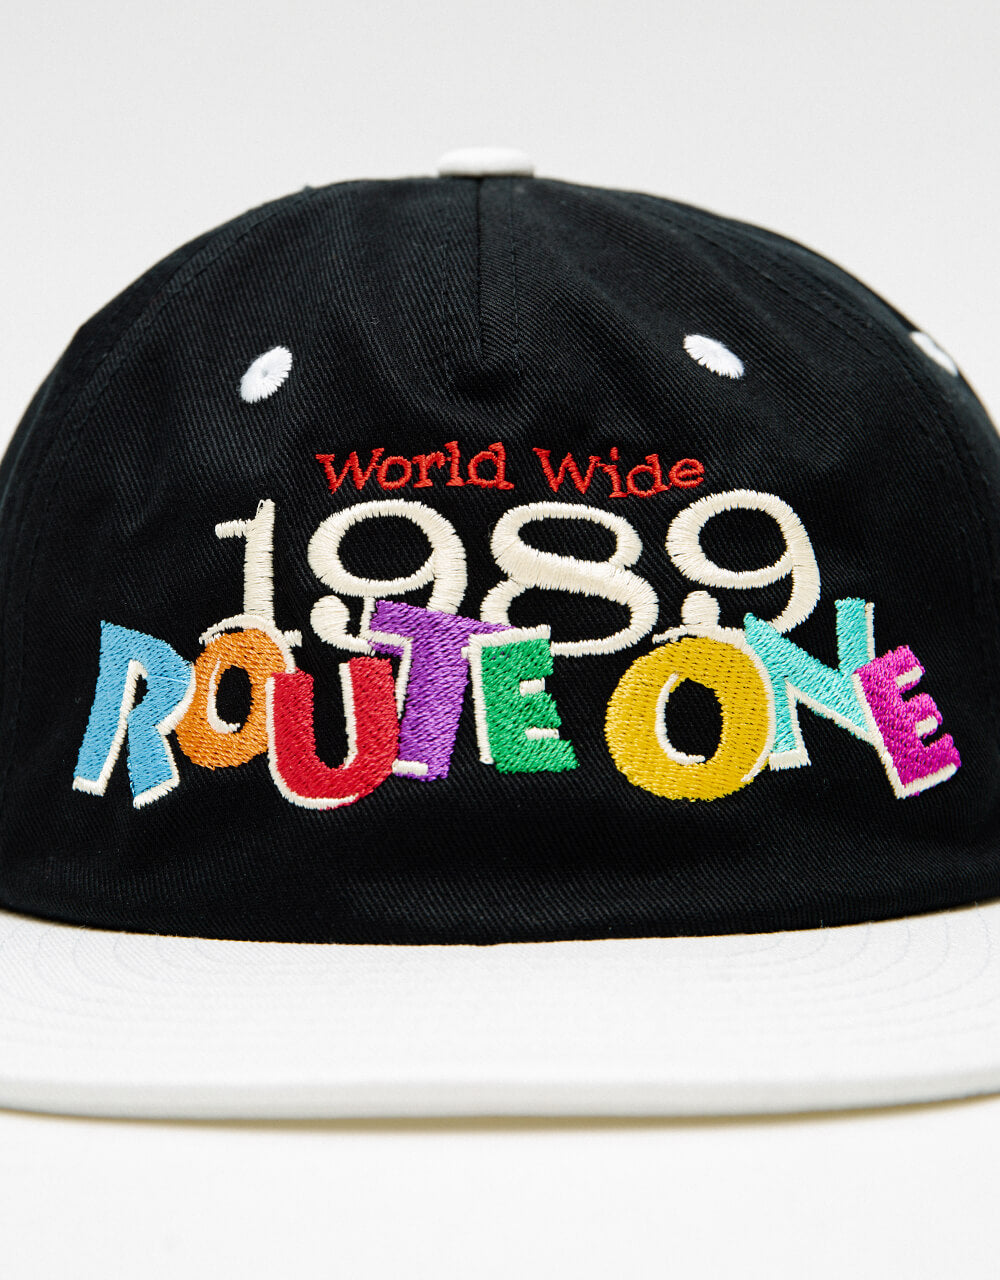 Route One Madness Snapback Cap - Black/Natural